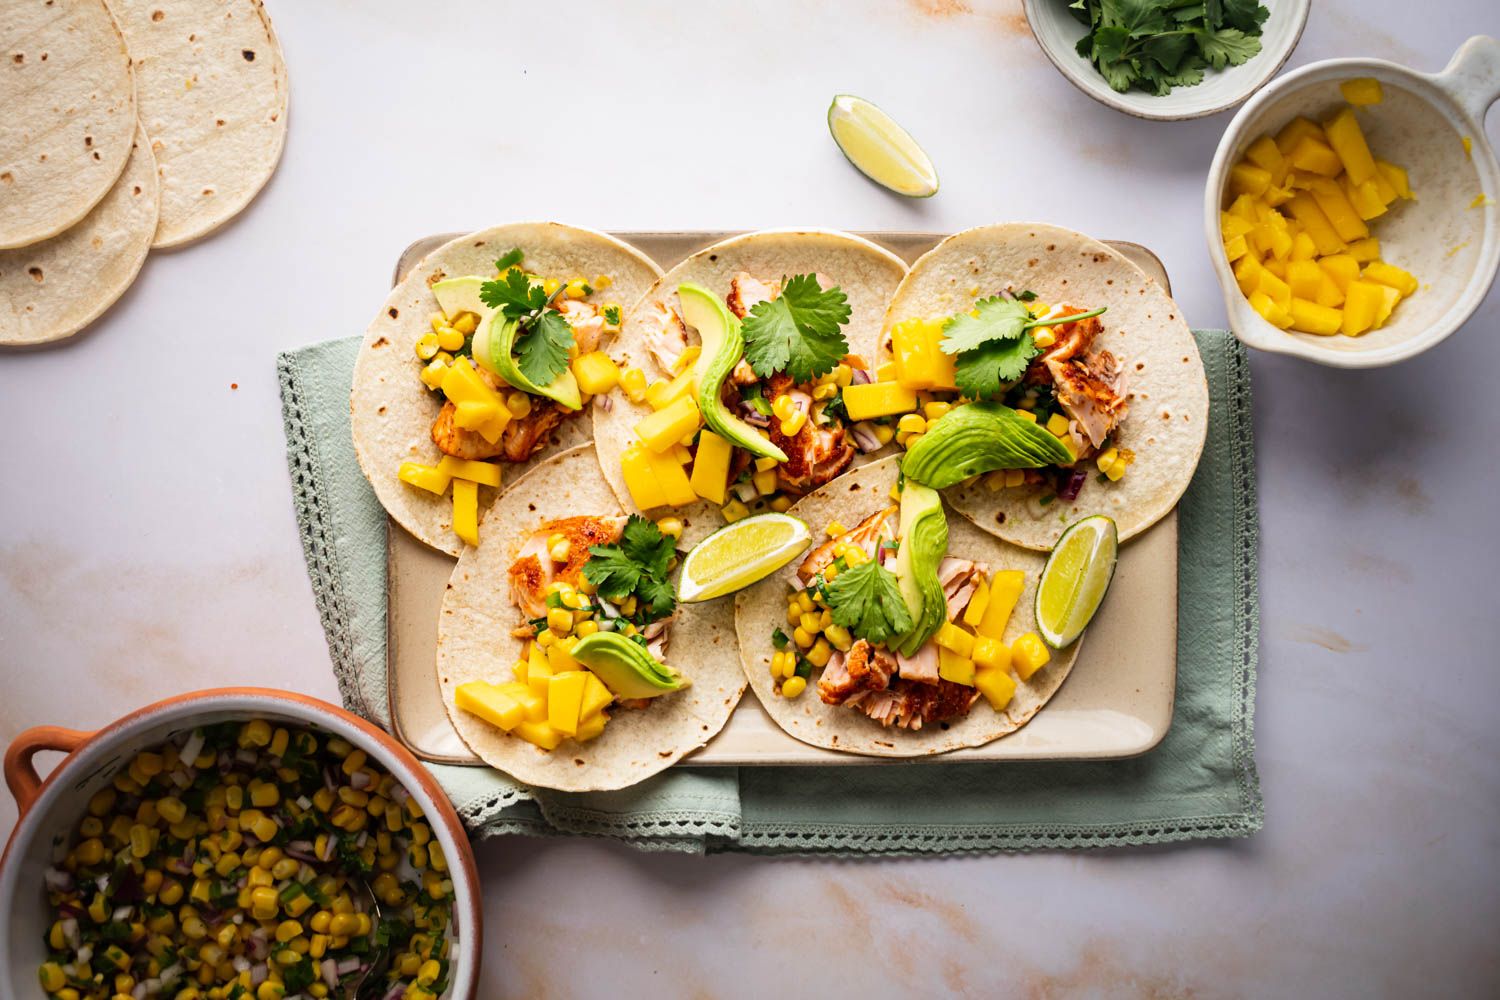 Salmon tacos with corn salsa, avocado, cilantro, and red onion served on corn tortillas. 